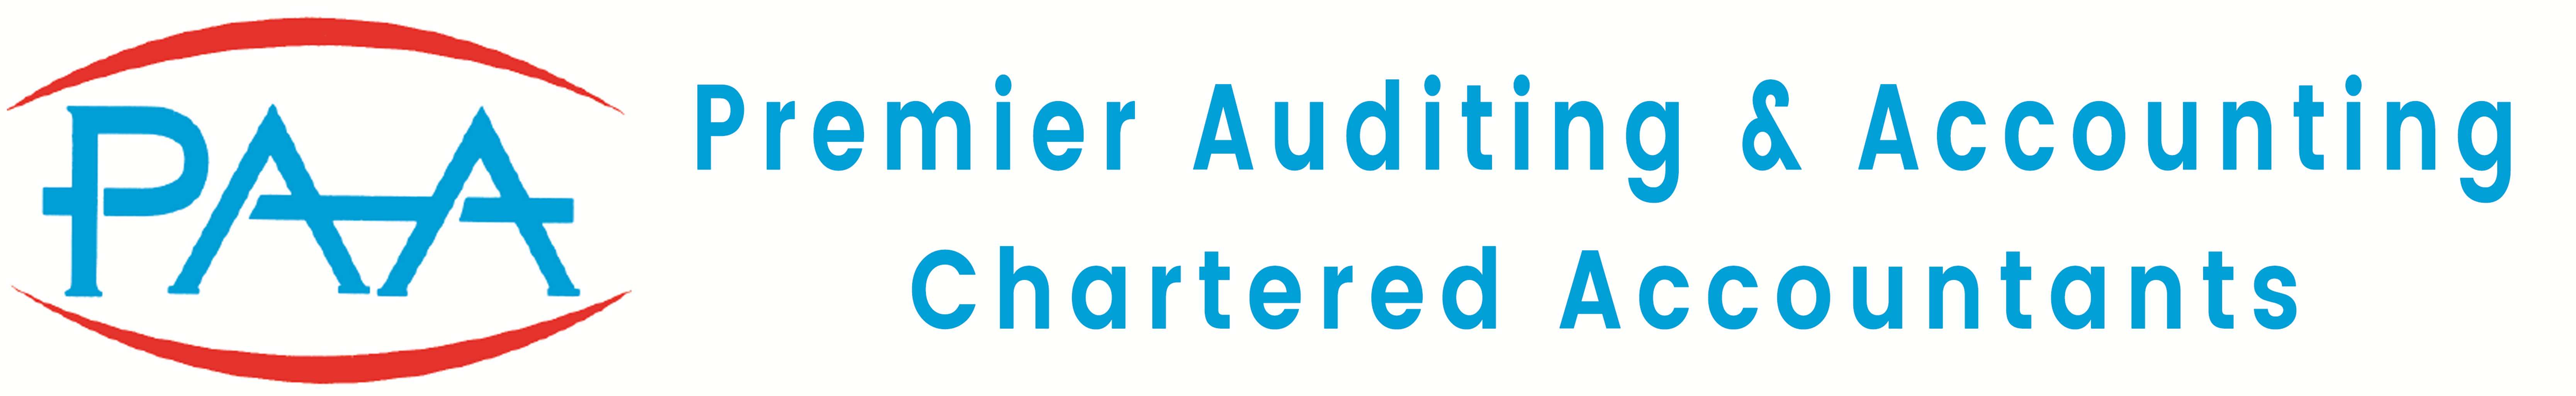 premier auditing and accounting